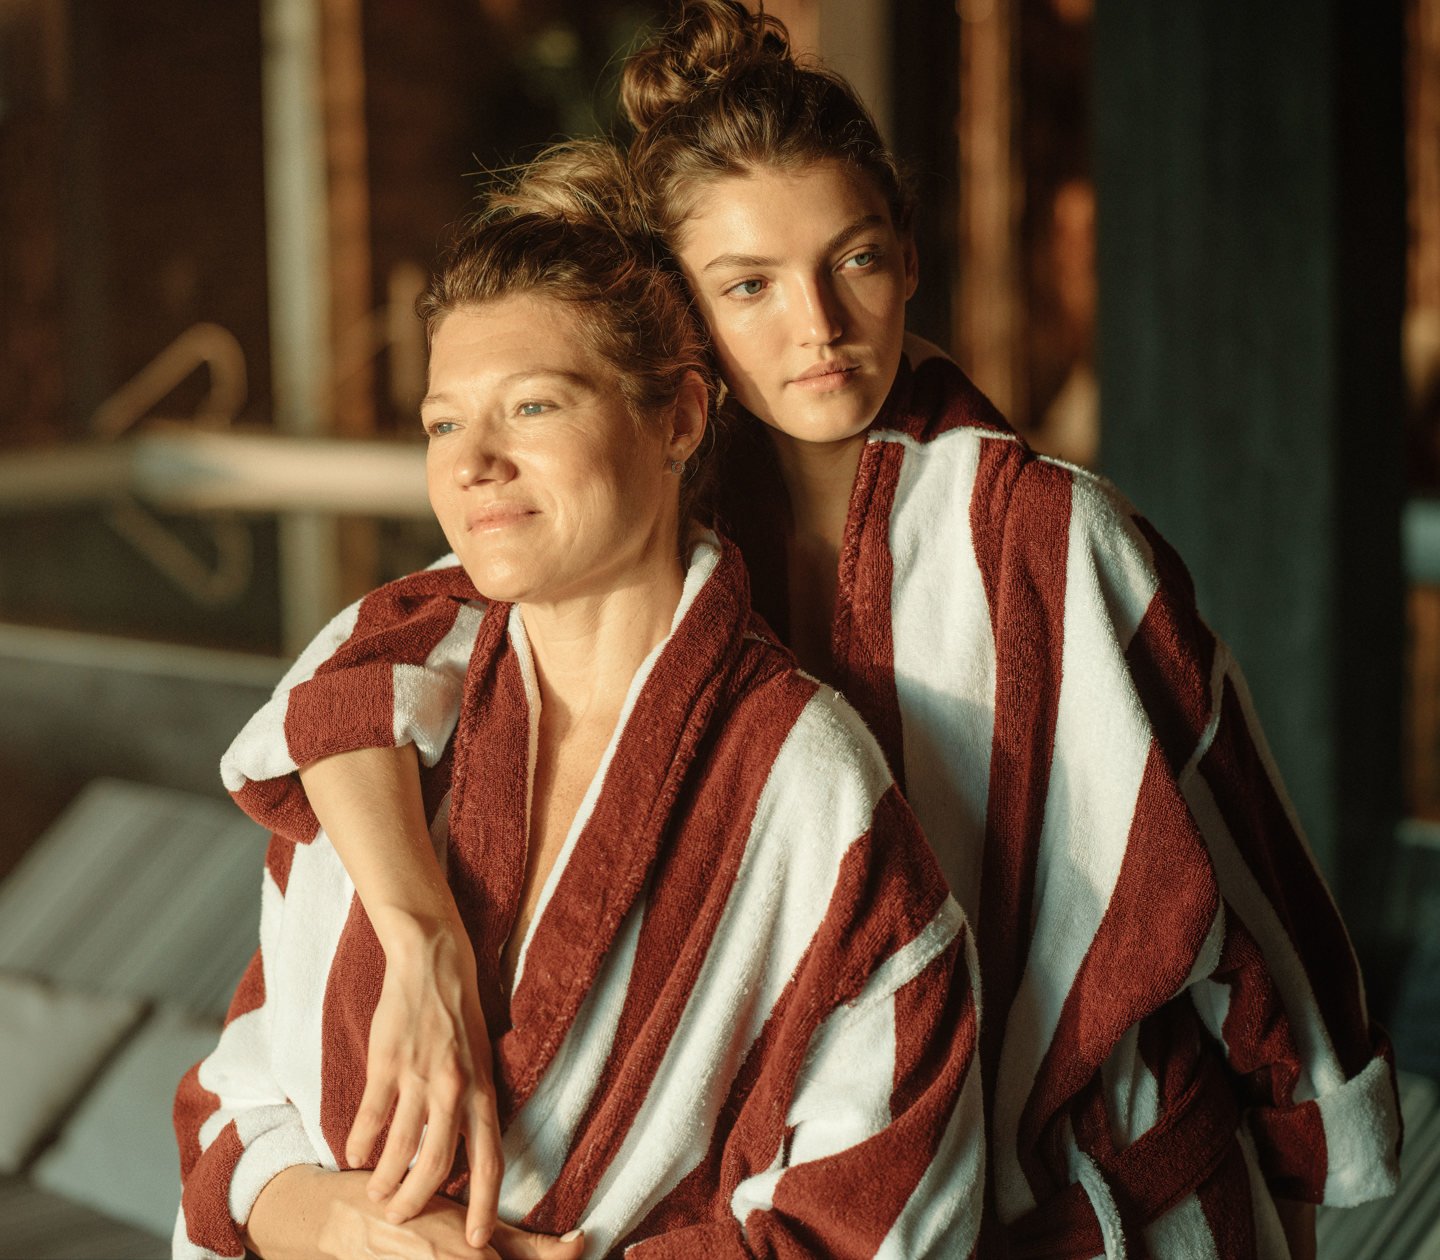 Mother and daughter sitting in bathrobes